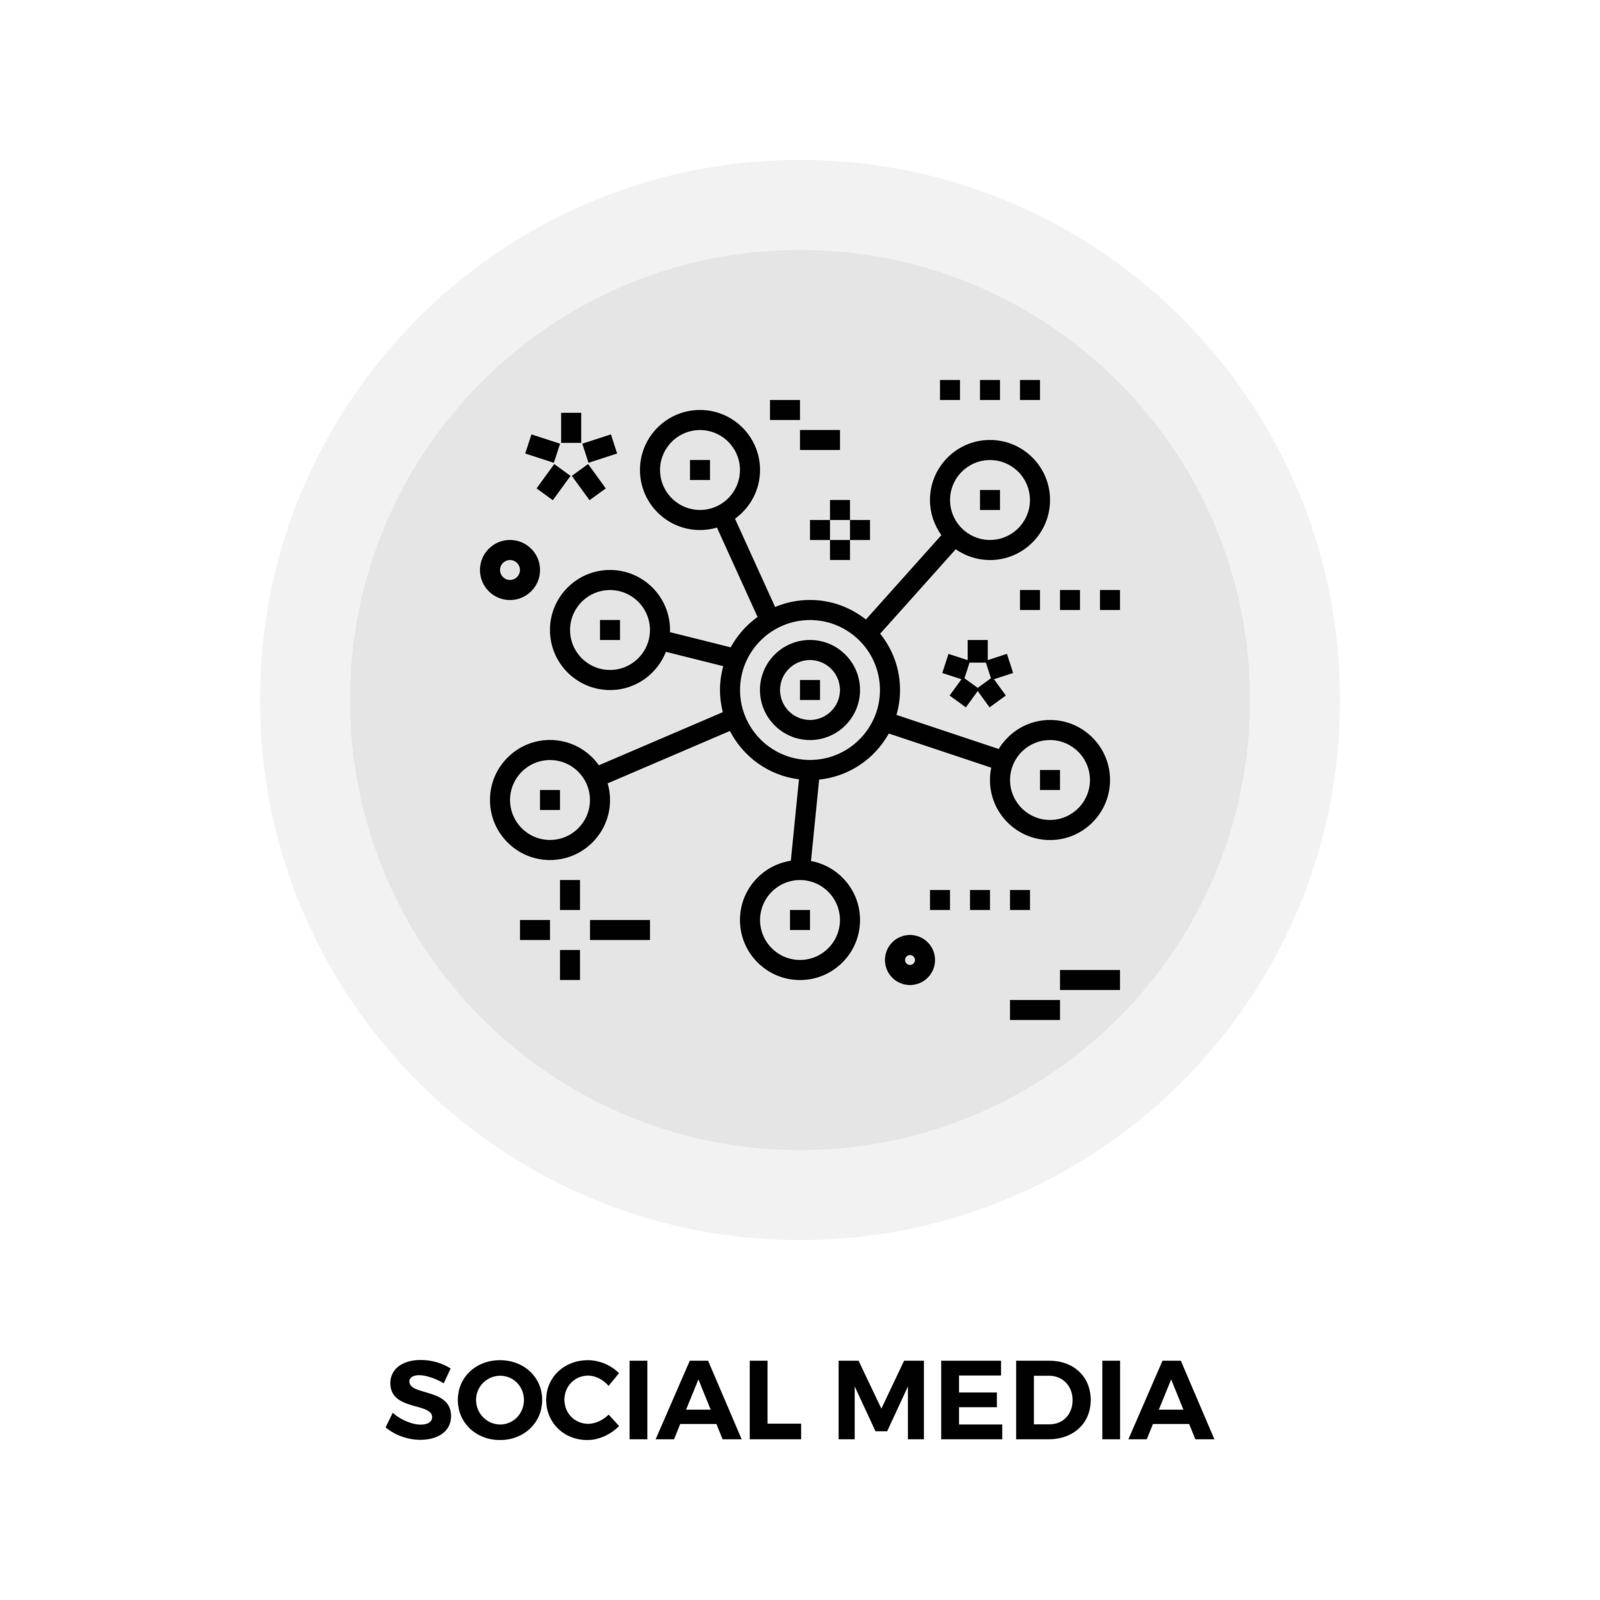 Social Media icon vector. Flat icon isolated on the white background. Editable EPS file. Vector illustration.